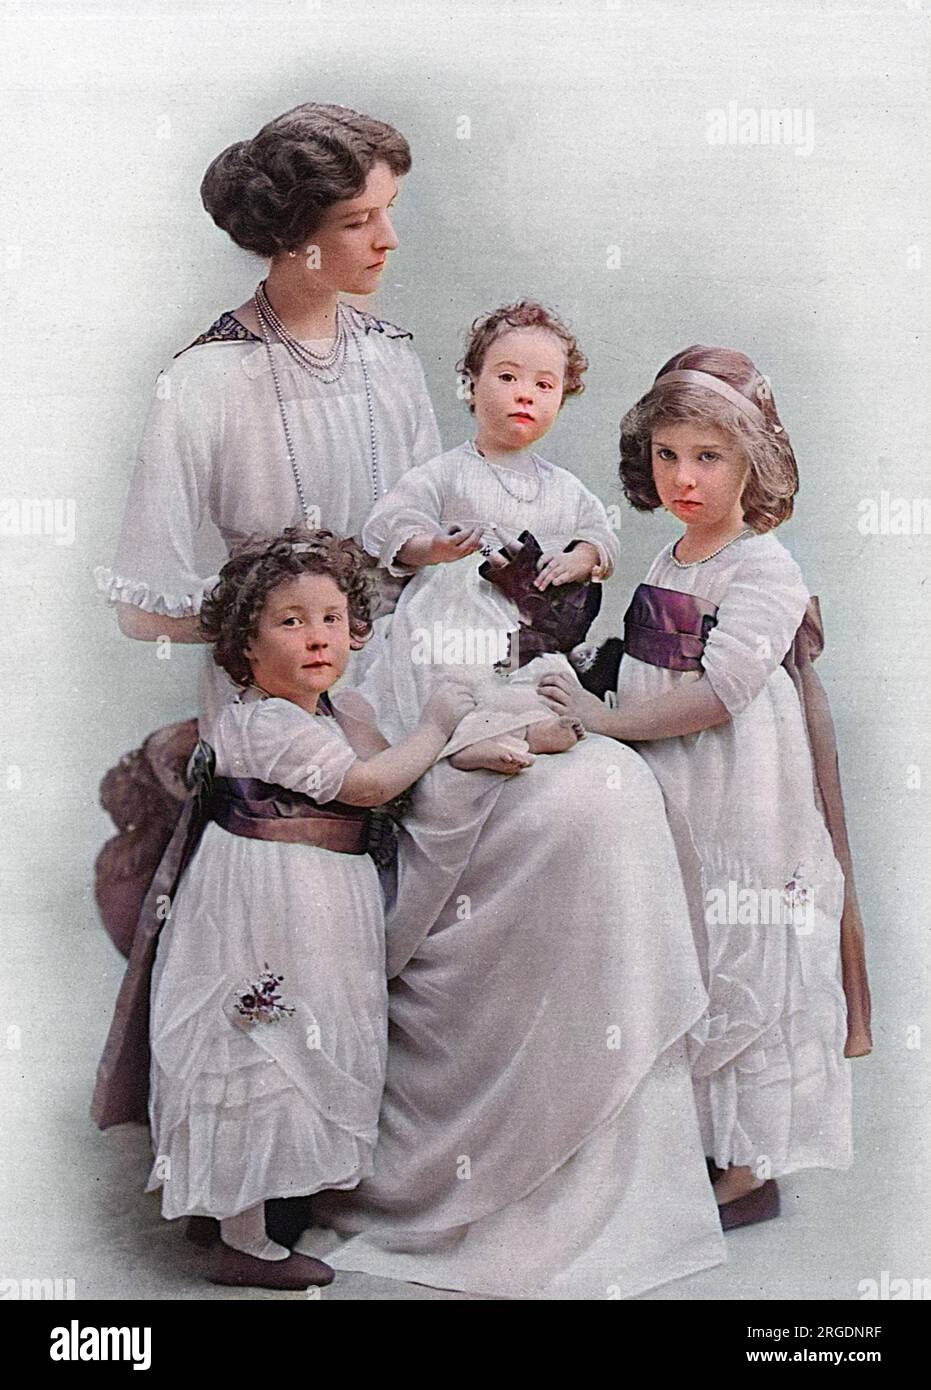 Lady Ingestre, formerly Lady Winifred Paget, widow of the late Lord Ingestre who died in 1915 and was a captain in the Blues, pictured with her three daughters; the Hon. Ursula, Victoria and Joan, born 1907, 1910 and 1911 respectively. Of her four children, the youngest succeeded to the title of Earl of Shrewsbury.  A memorial service for the late Viscount Ingestre was held at the Chapel Royal, St. James's on 13 January 1915. Stock Photo